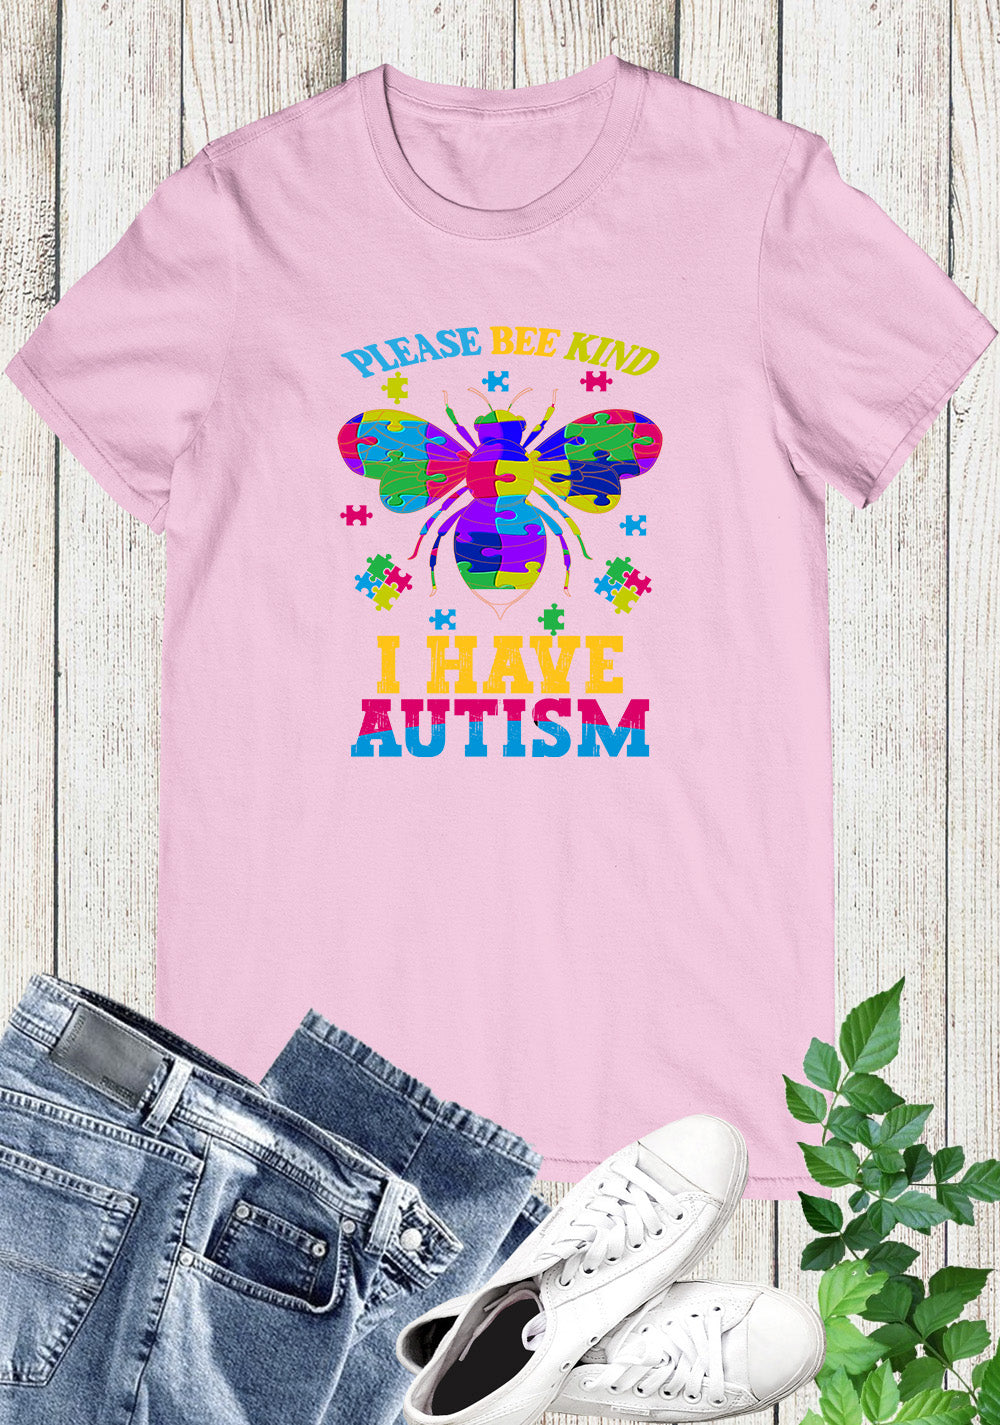 Please Bee Kind with me I Have Autism Shirt